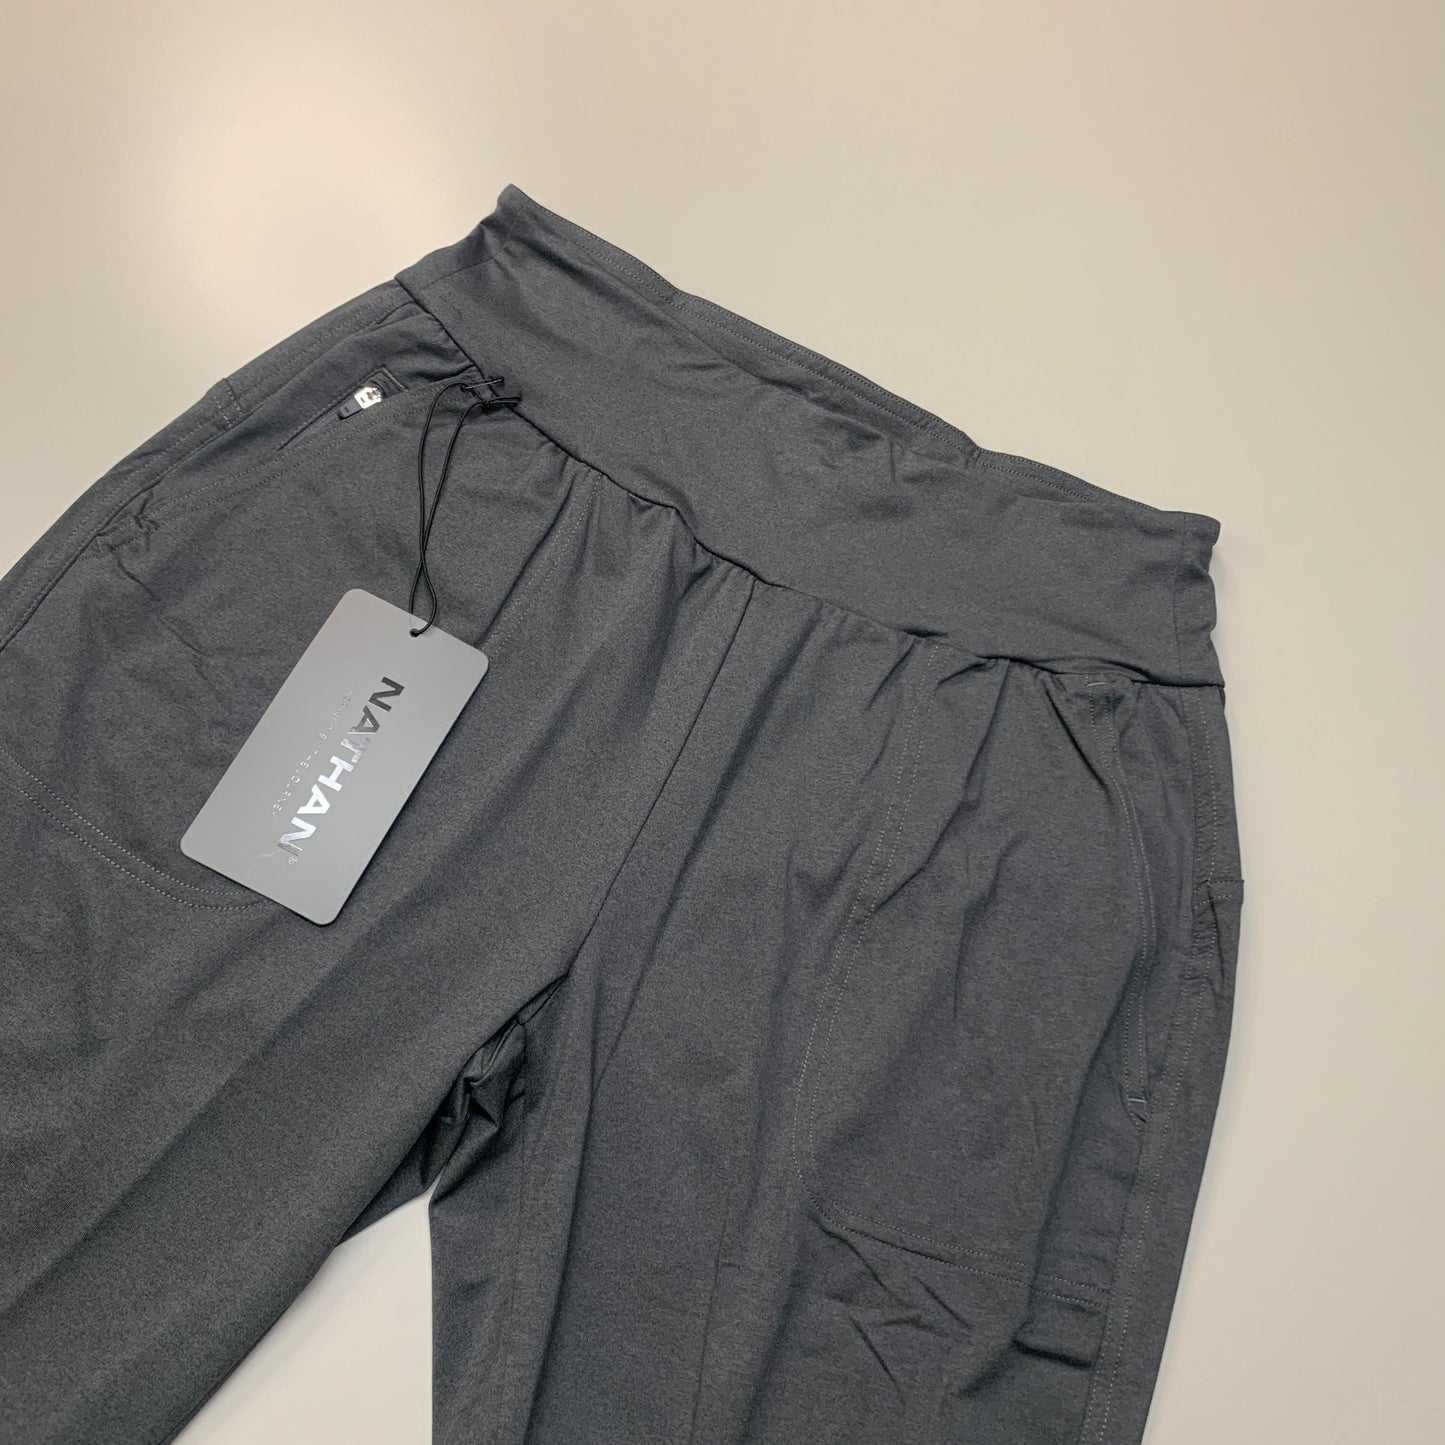 NATHAN 365 Jogger Women's Dark Charcoal Size S NS50640-80078-S